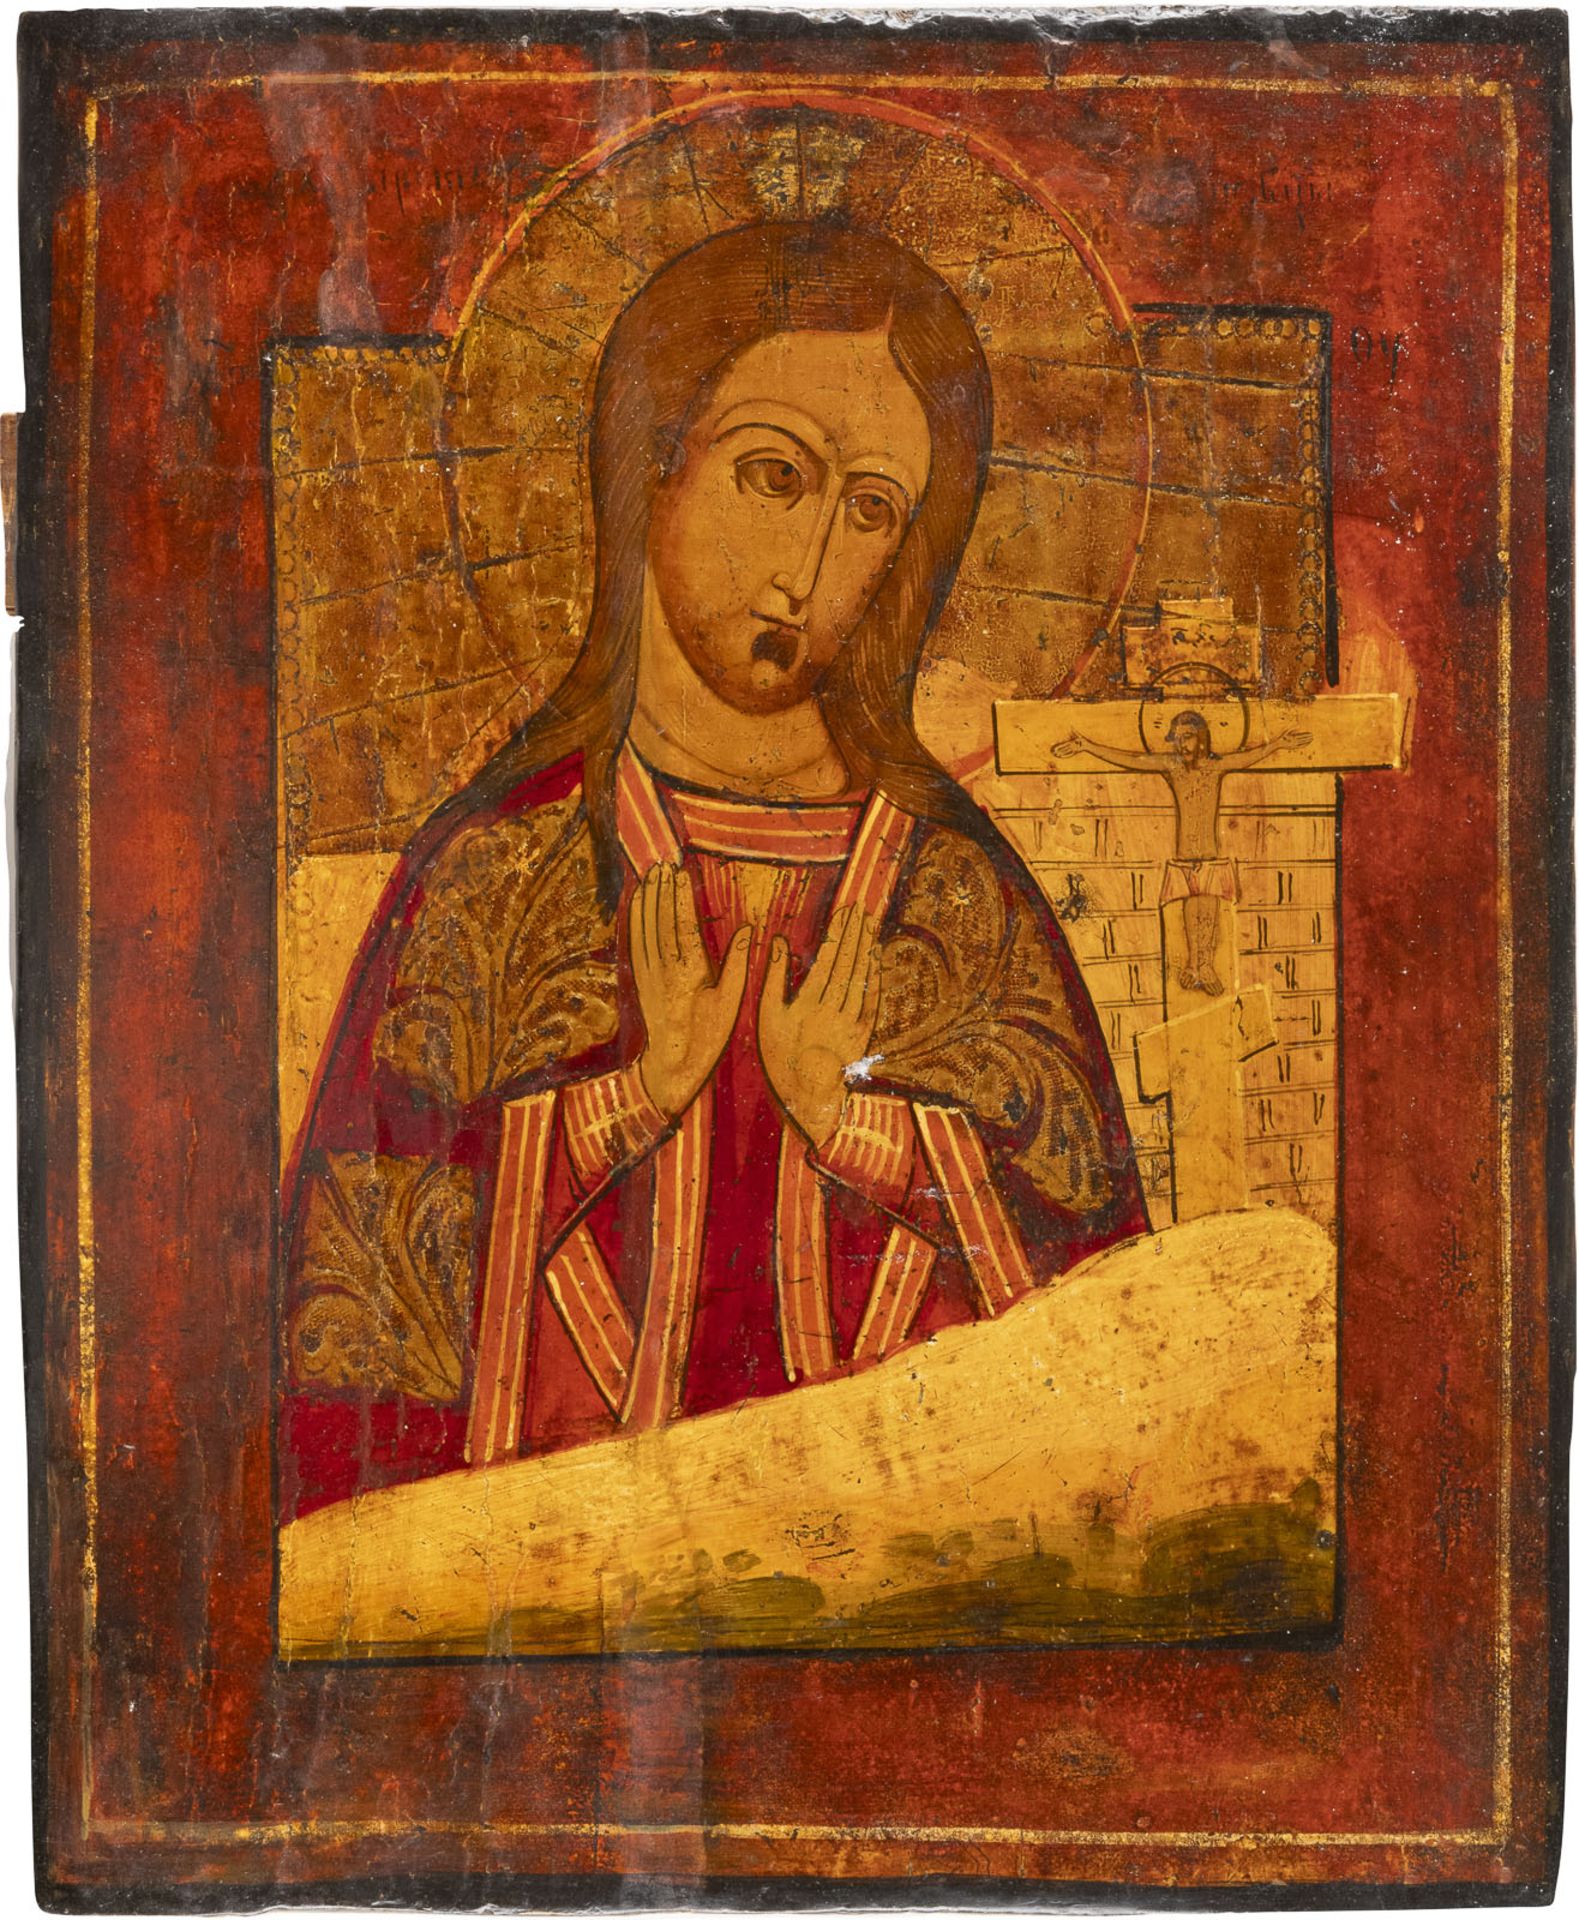 AN ICON SHOWING THE AKHTYRSKAYA MOTHER OF GOD